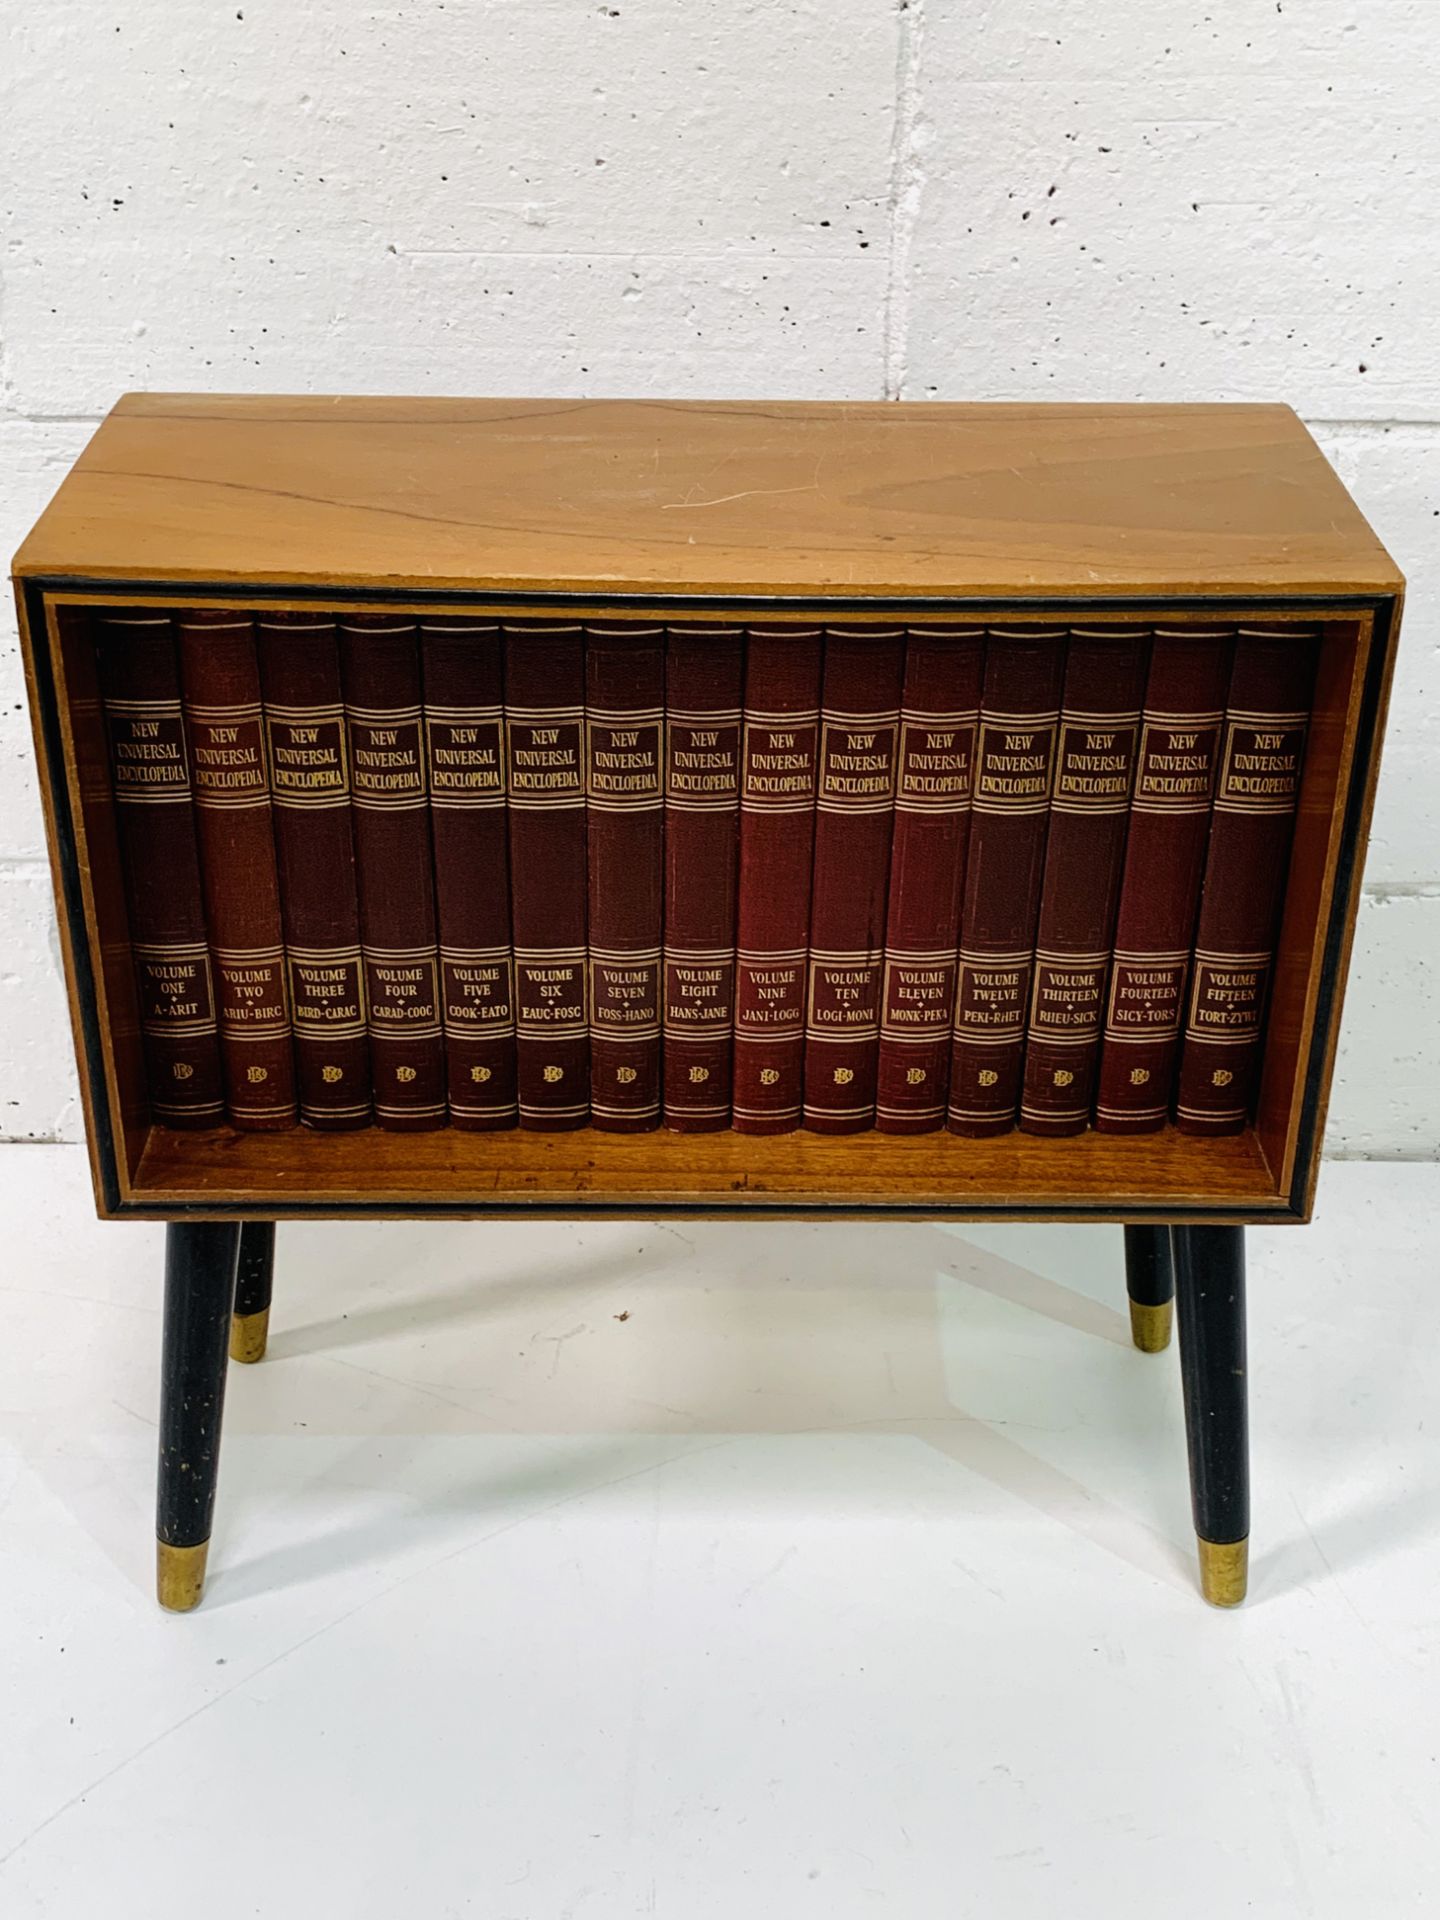 Teak small 1950's bookcase on legs with a complete set of the New Universal Encyclopedia.